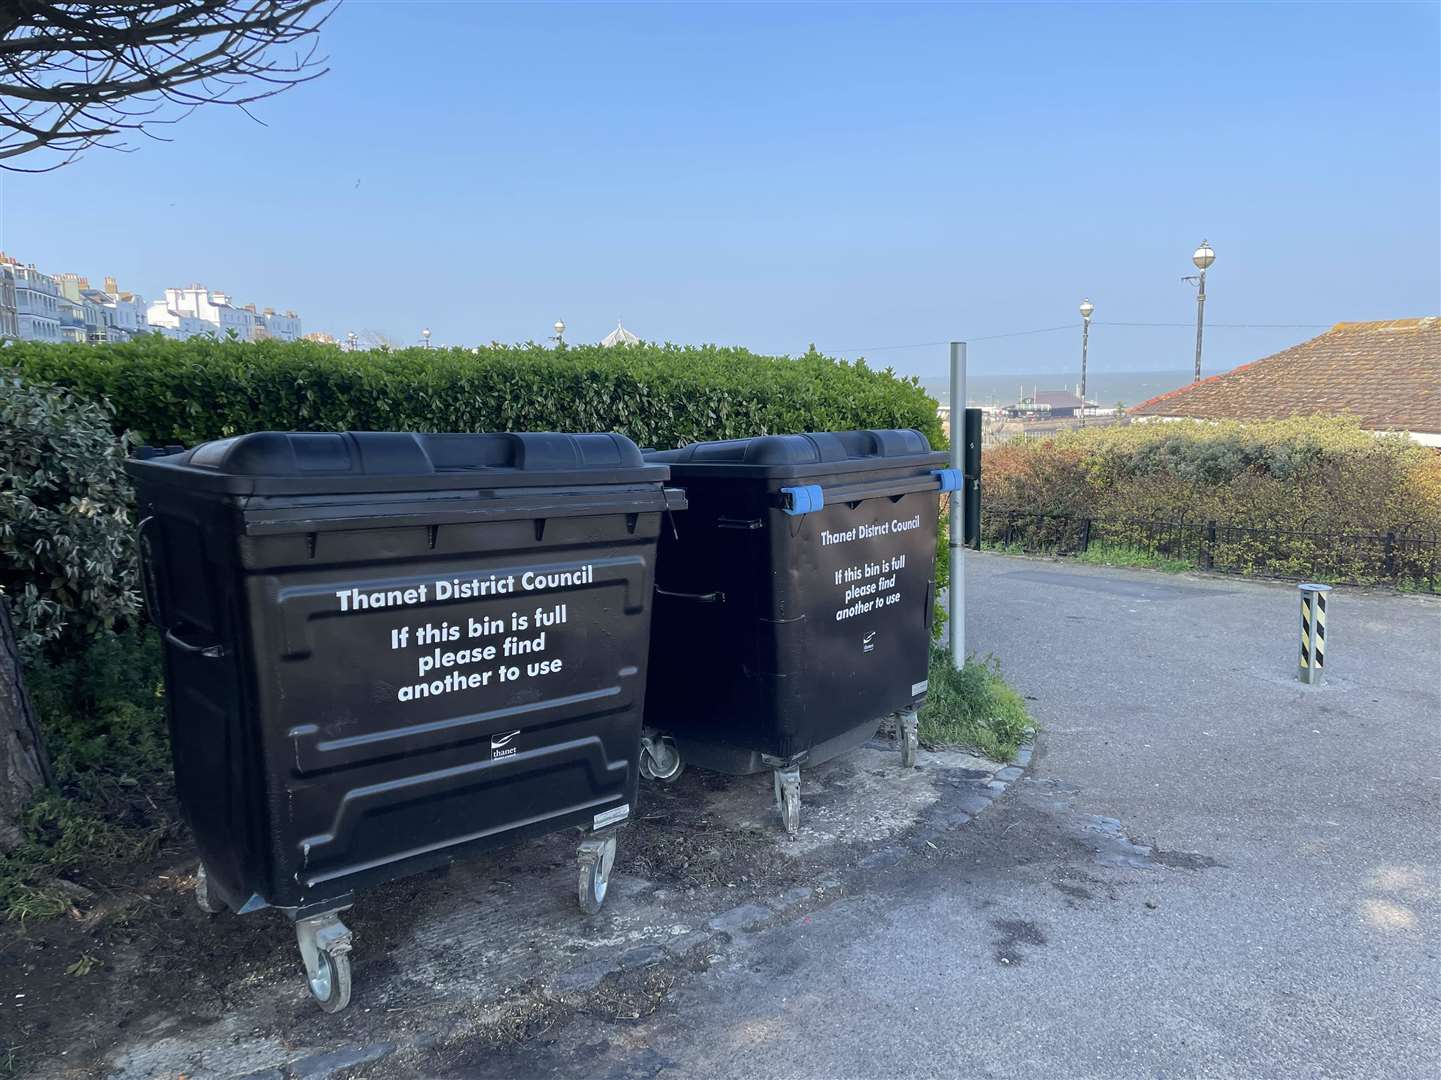 The council has now replaced the bins with new ones. Picture: Mike Bridges